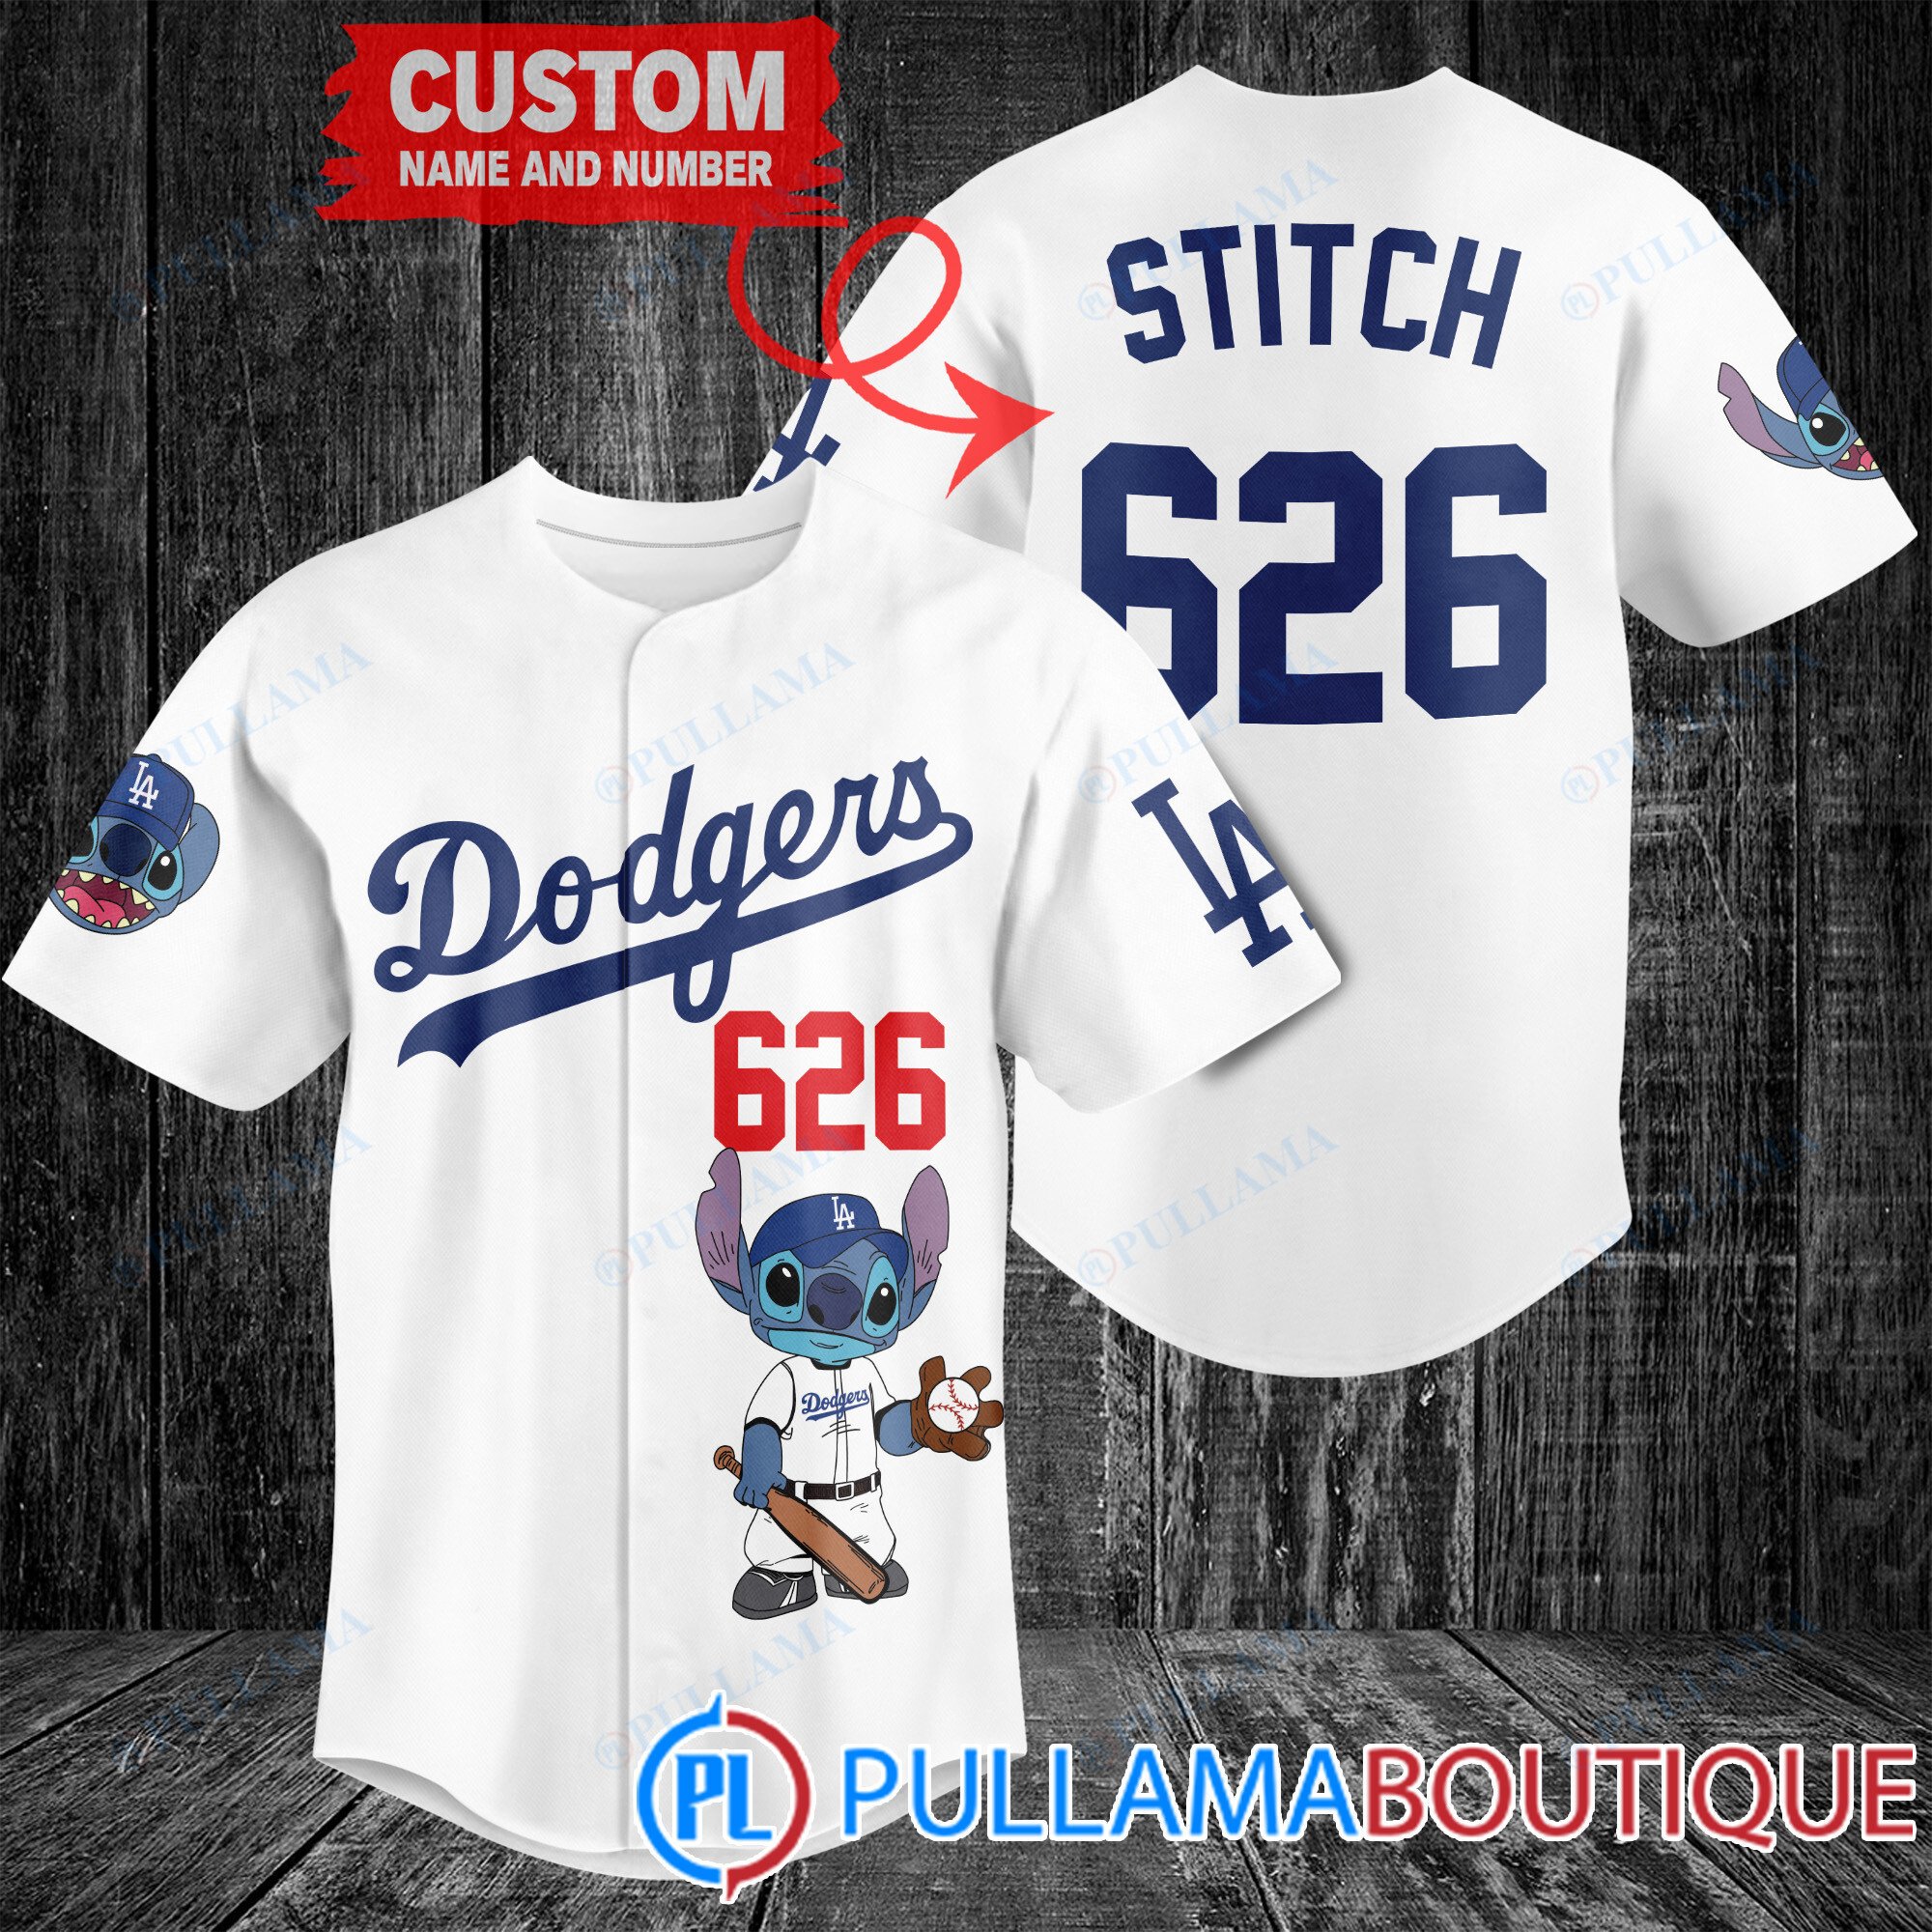 MLB Dodgers Here To Win White Design Personalized Baseball Jersey - Growkoc